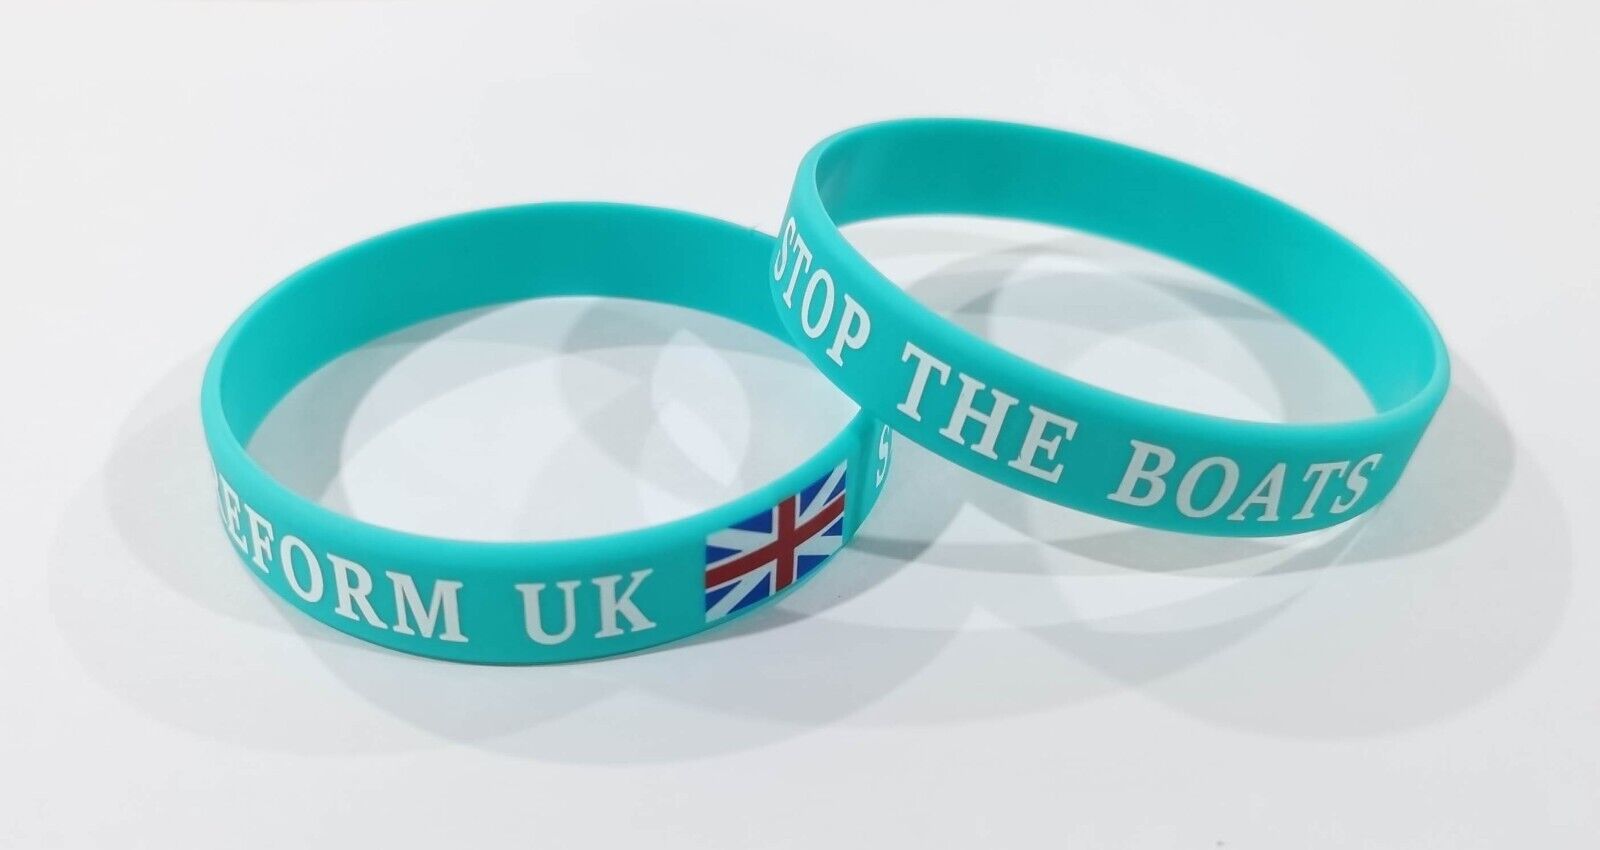 REFORM UK - Stop the Boats - Wristband - Be British, Be Brave - Union Flag